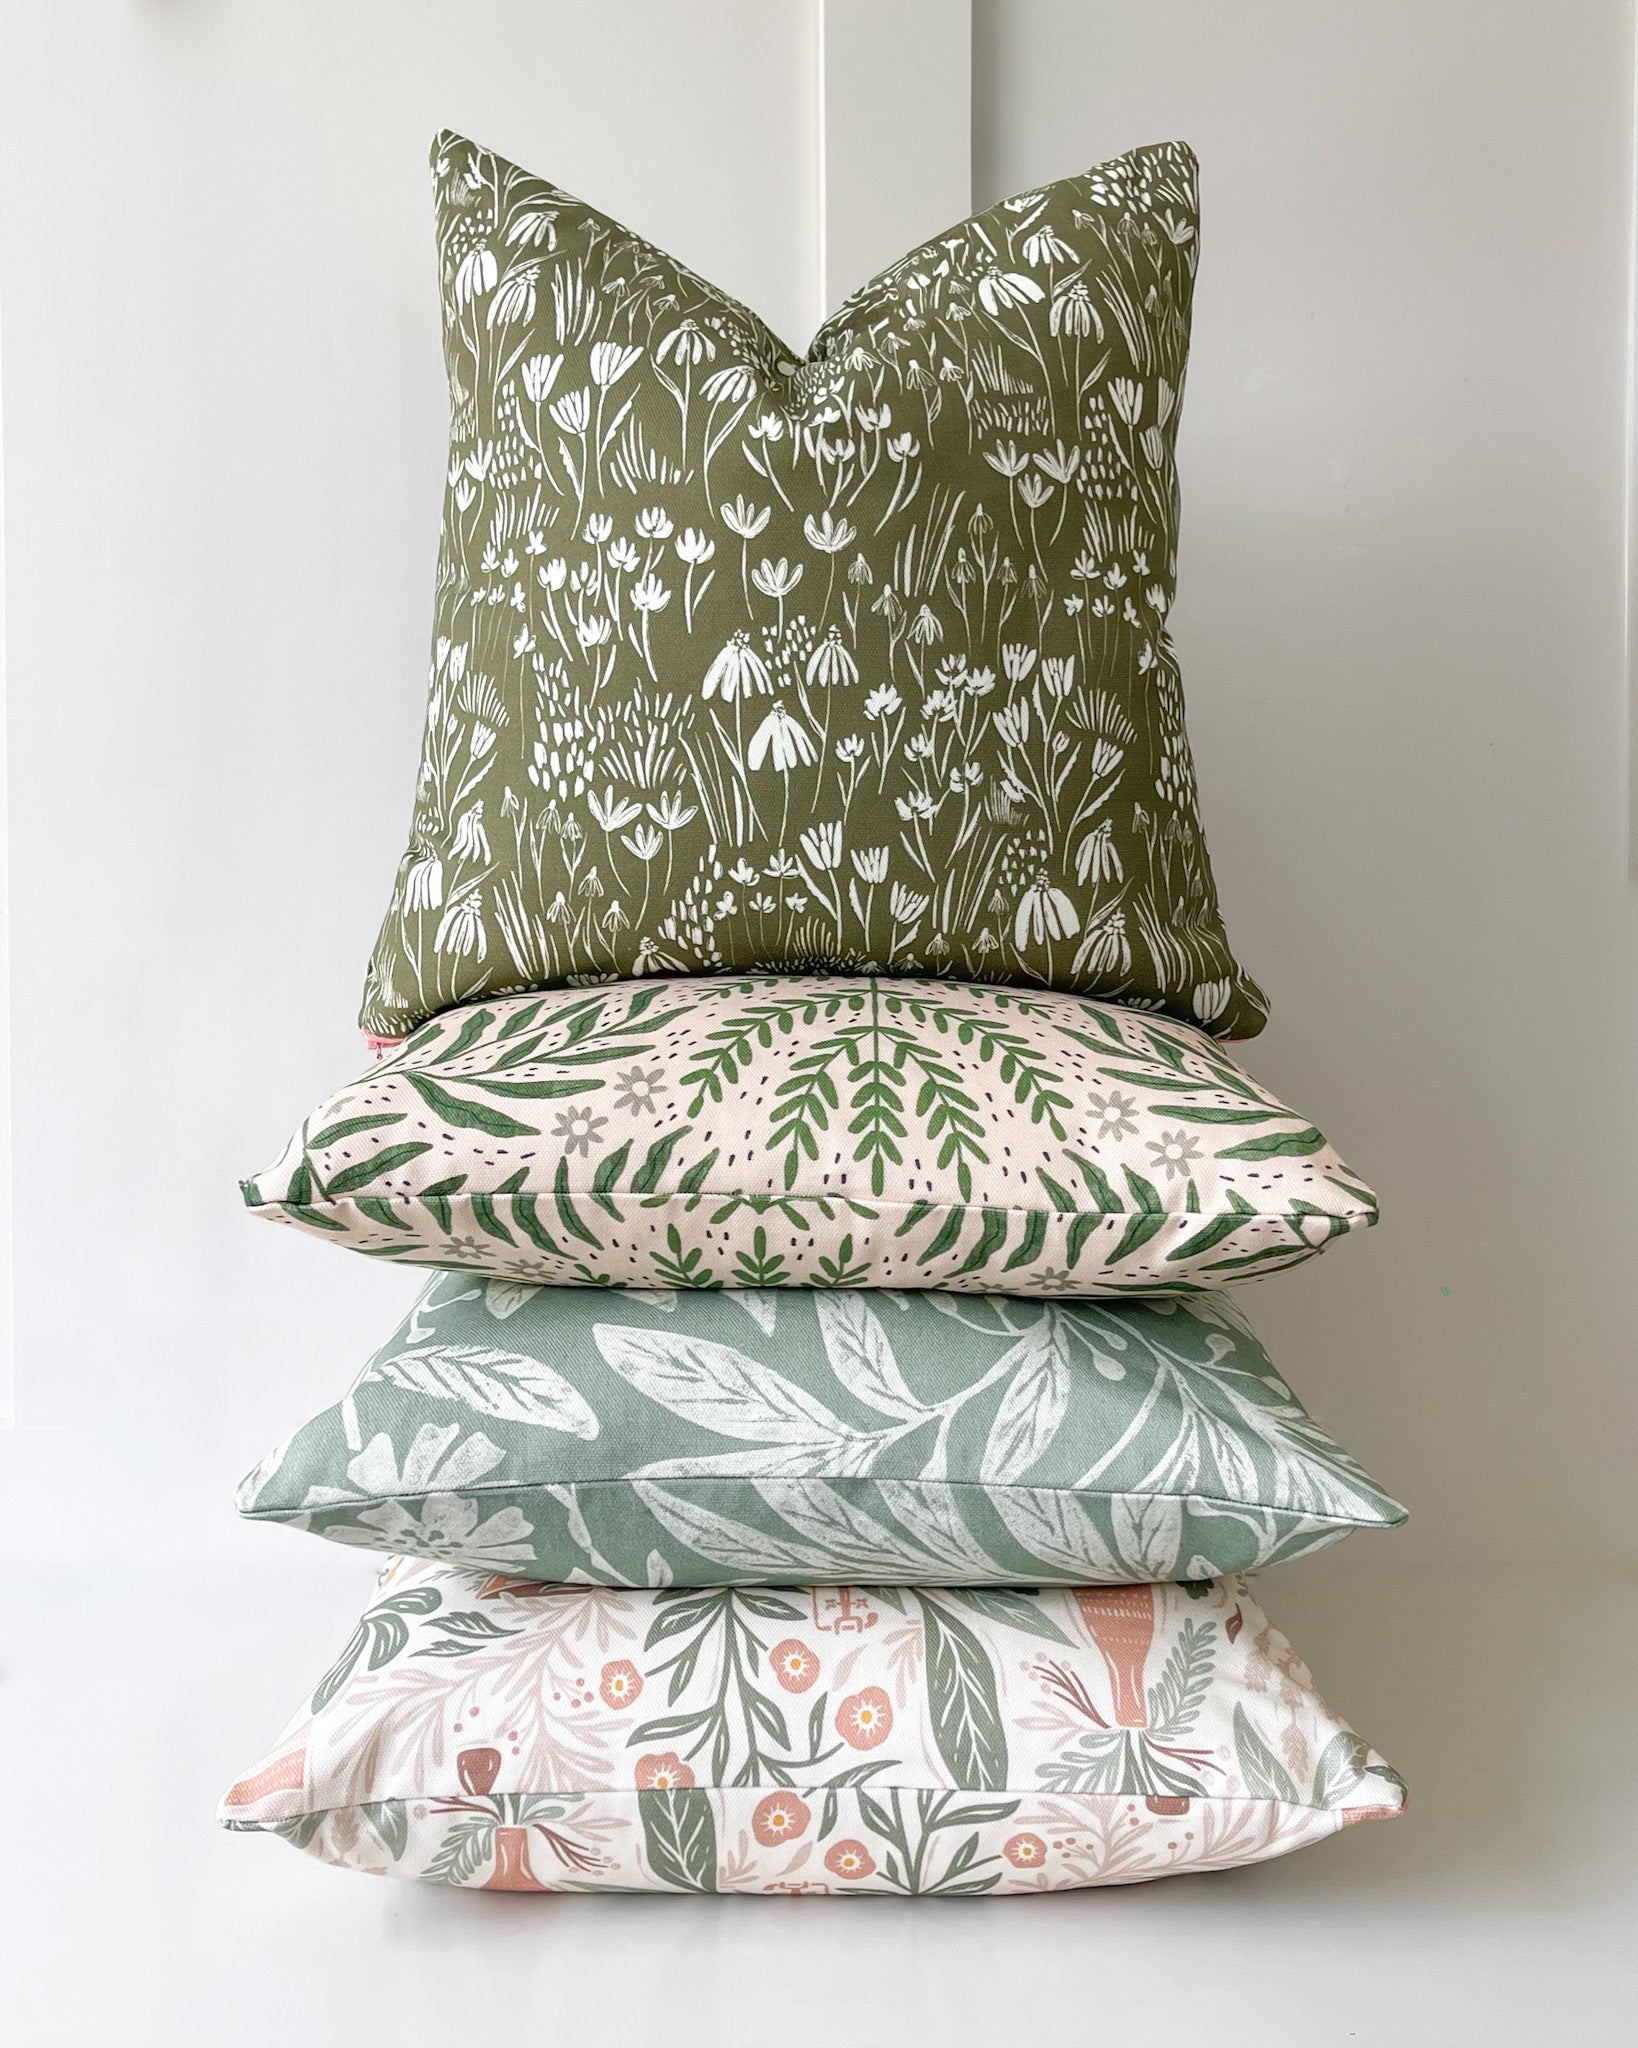 Stacked Decorative Cushions with Nature-spired botanical leafy floral prints. Handmade Scatter Cushions